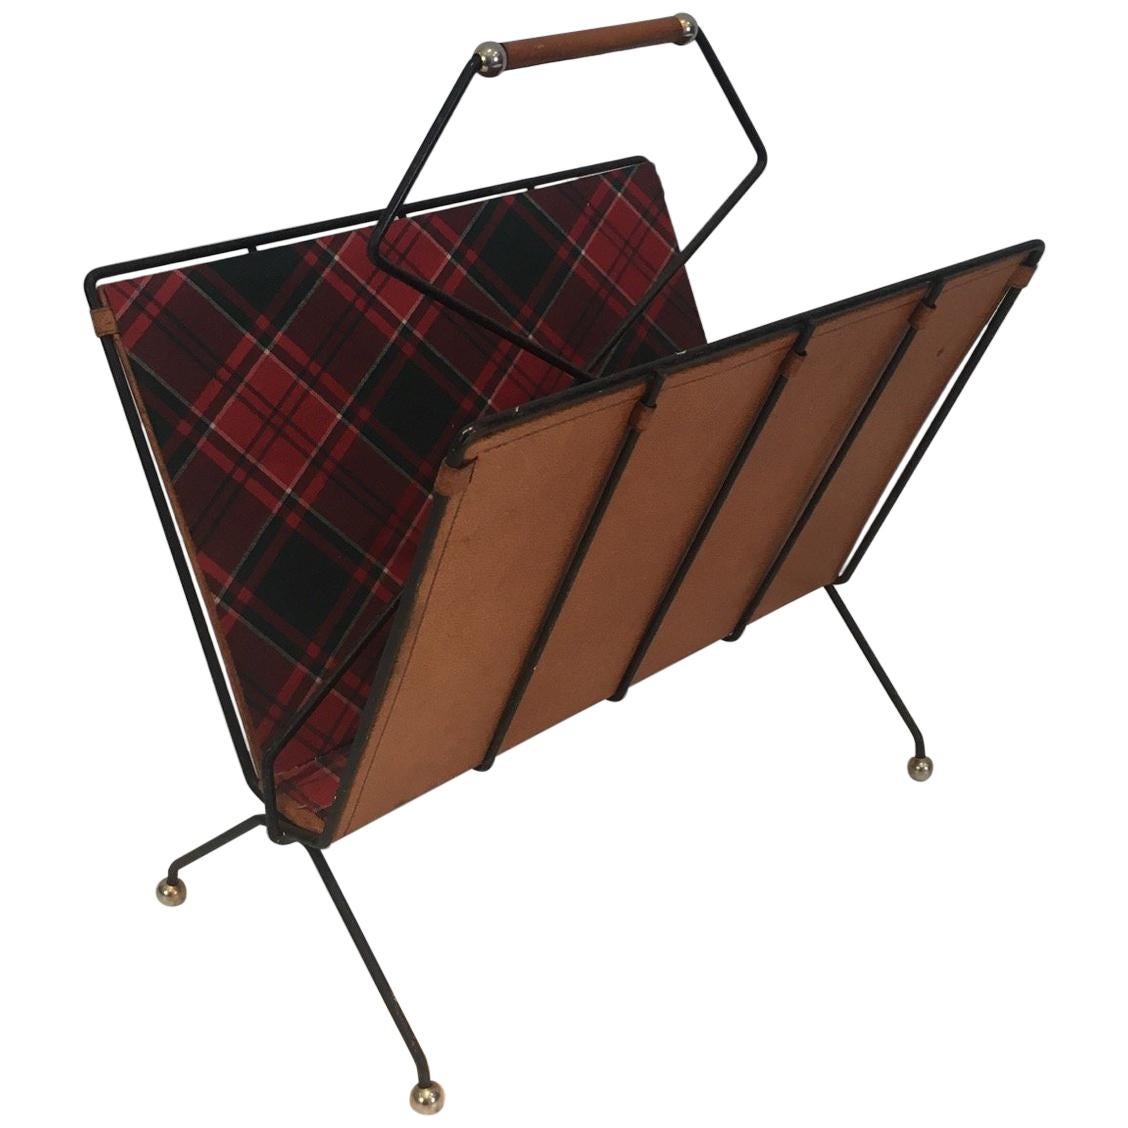 Rare Black Lacquered Metal, Leather and Plaid Fabric Magazine Rack